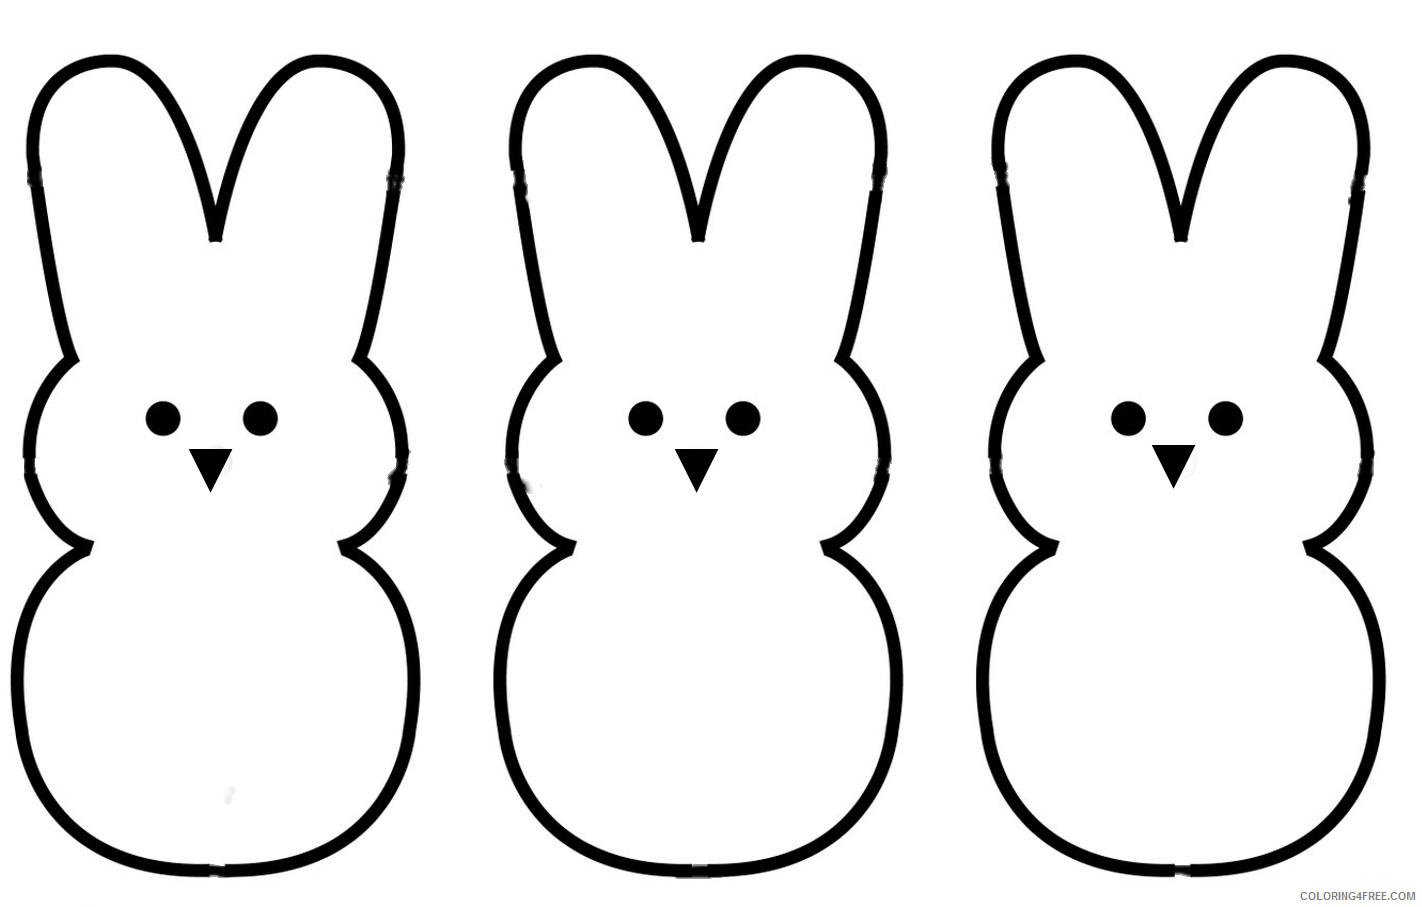 Bunny Outline Coloring Pages bunny outline co CuMeuQ Printable Coloring4free